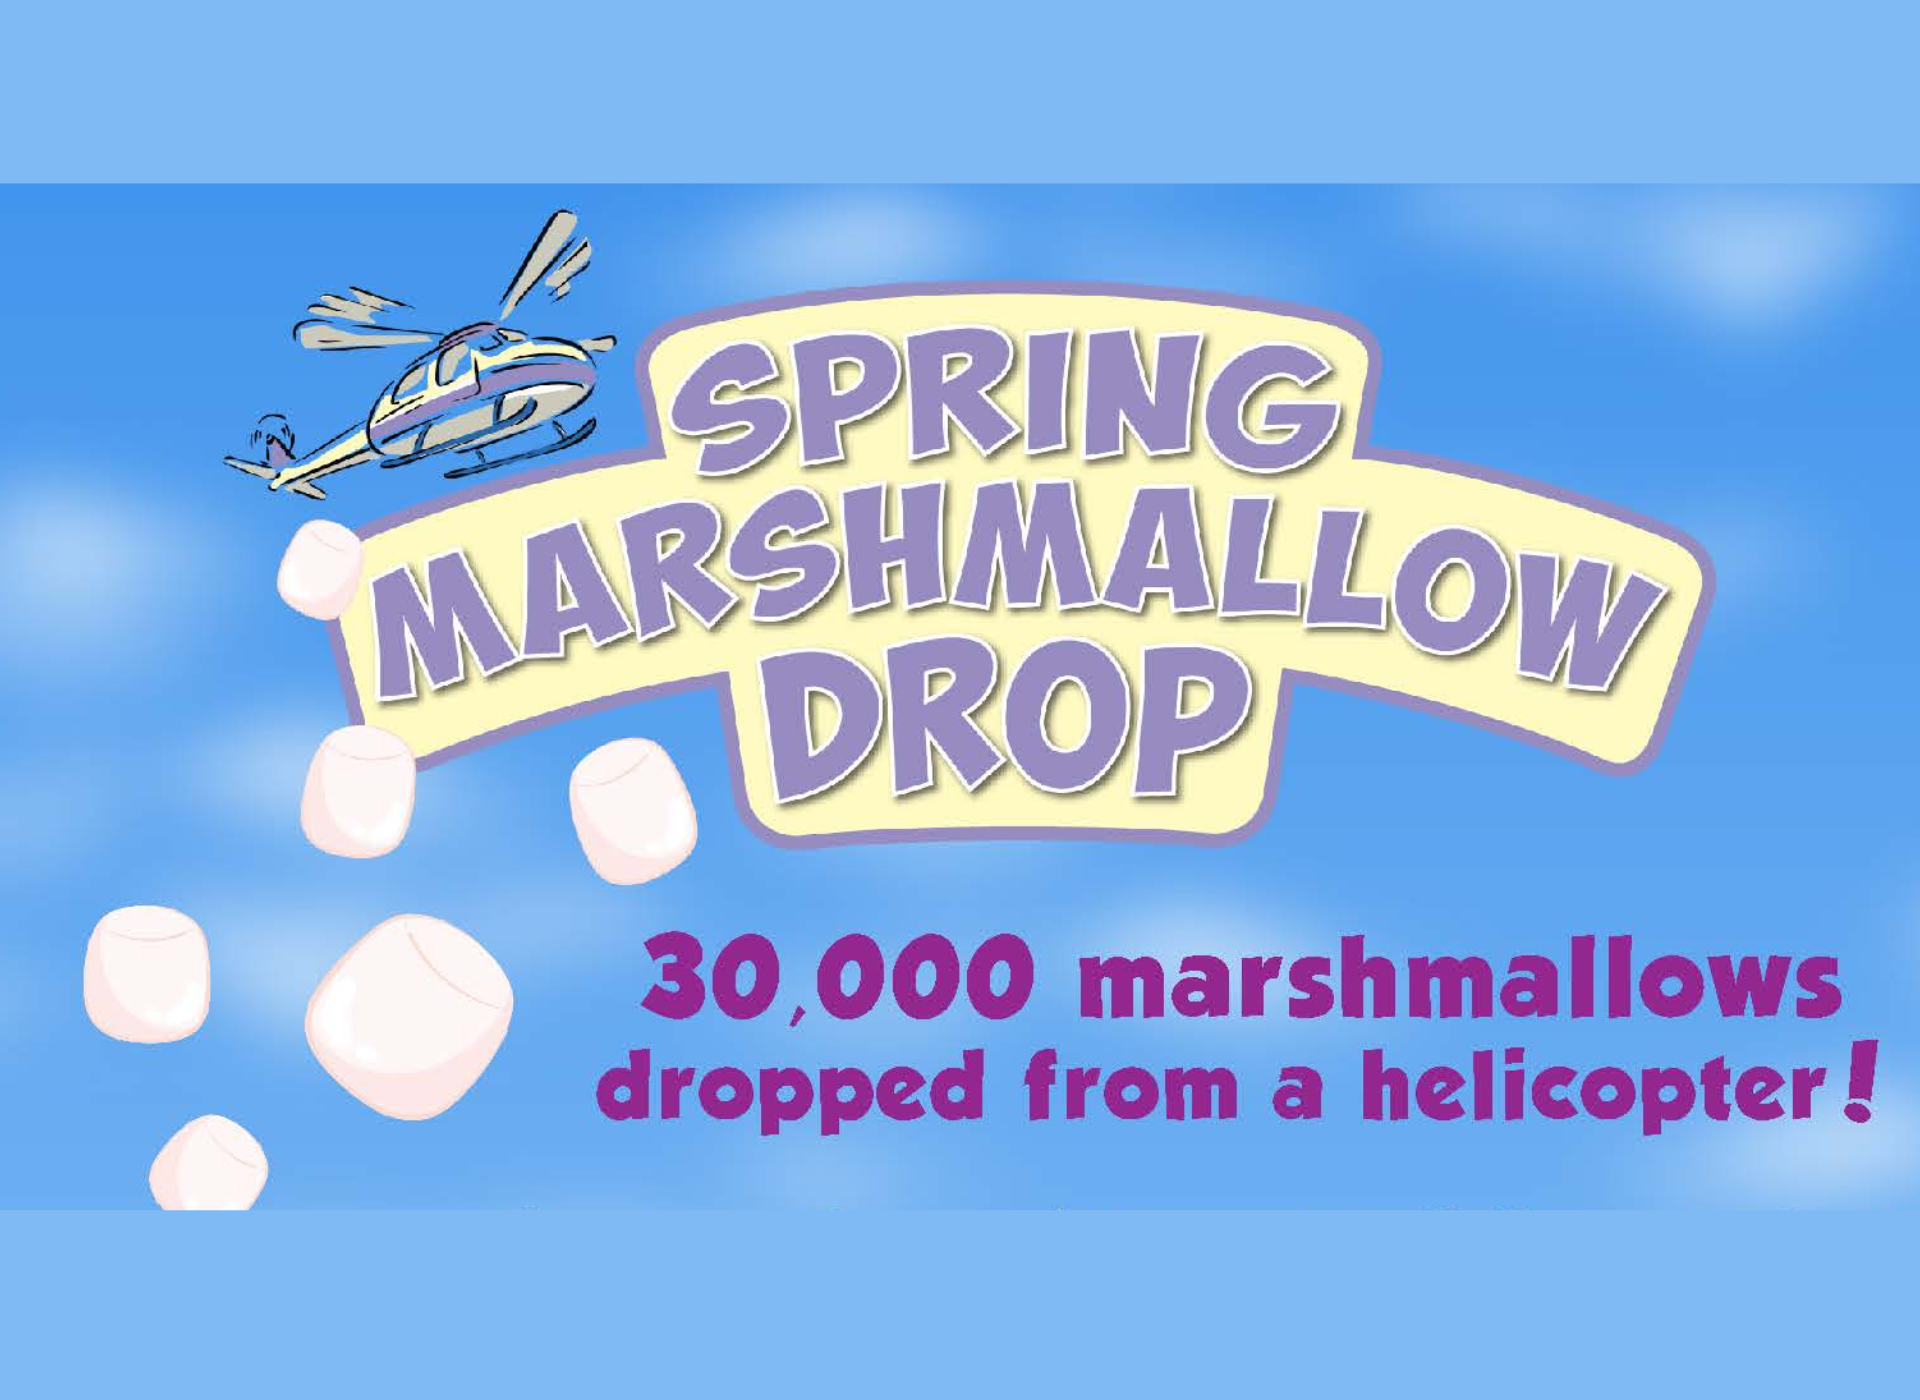 City of Hollywood - Spring Marshmallow Drop